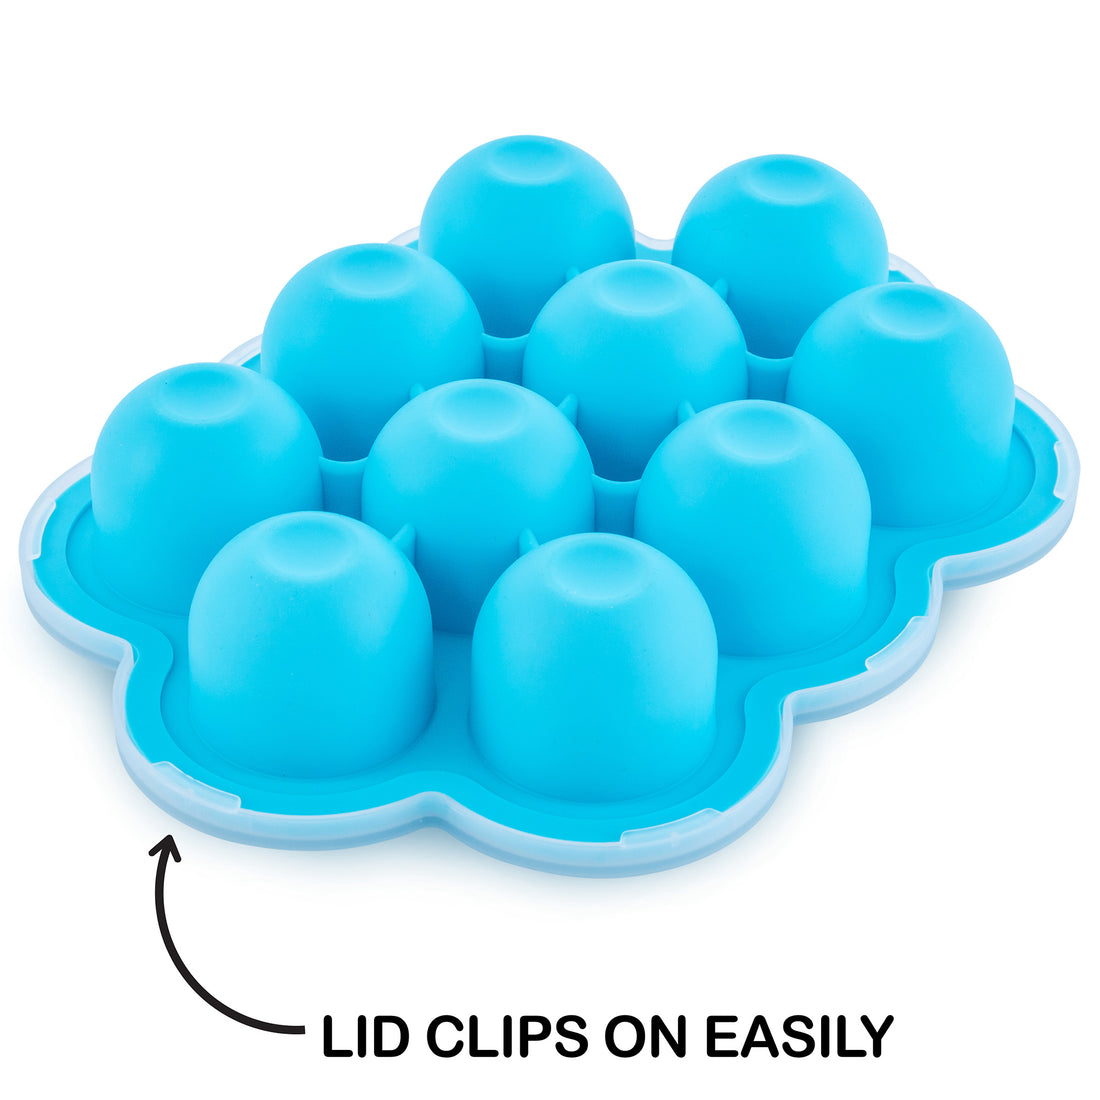 WEESPROUT Silicone Baby Food Freezer Tray with Clip-on Lid – Kim